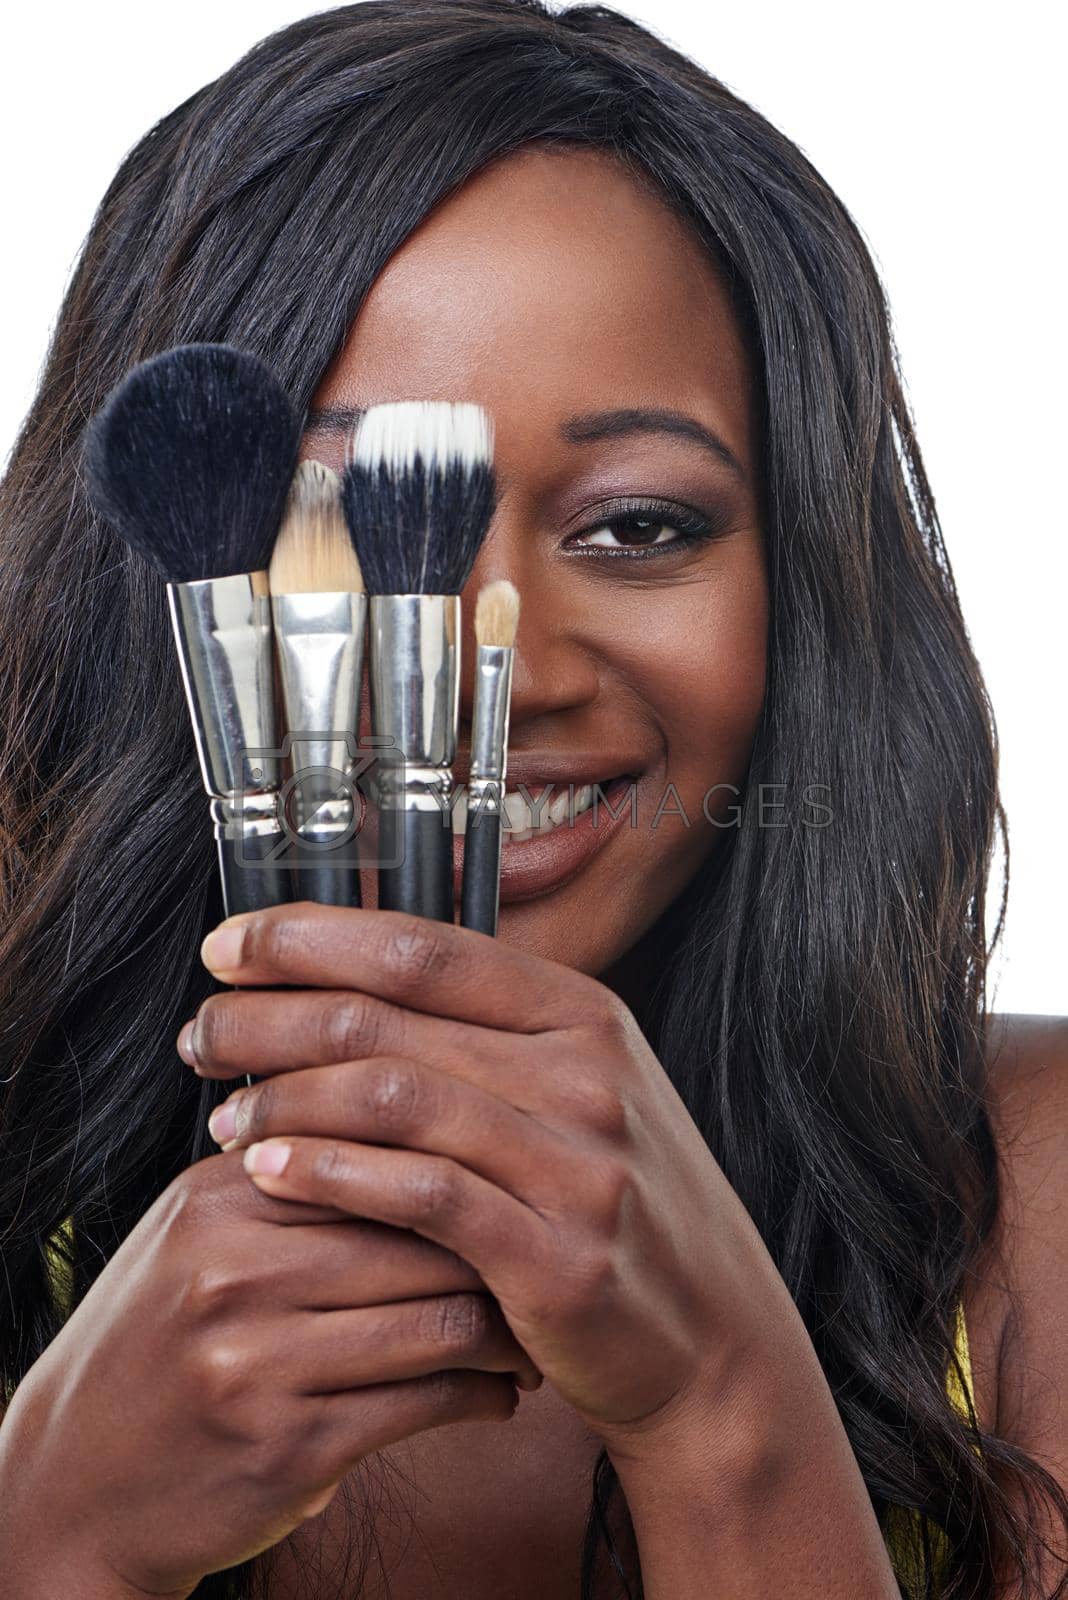 Studio shot of a young woman holding a makeup brush isolated on white.